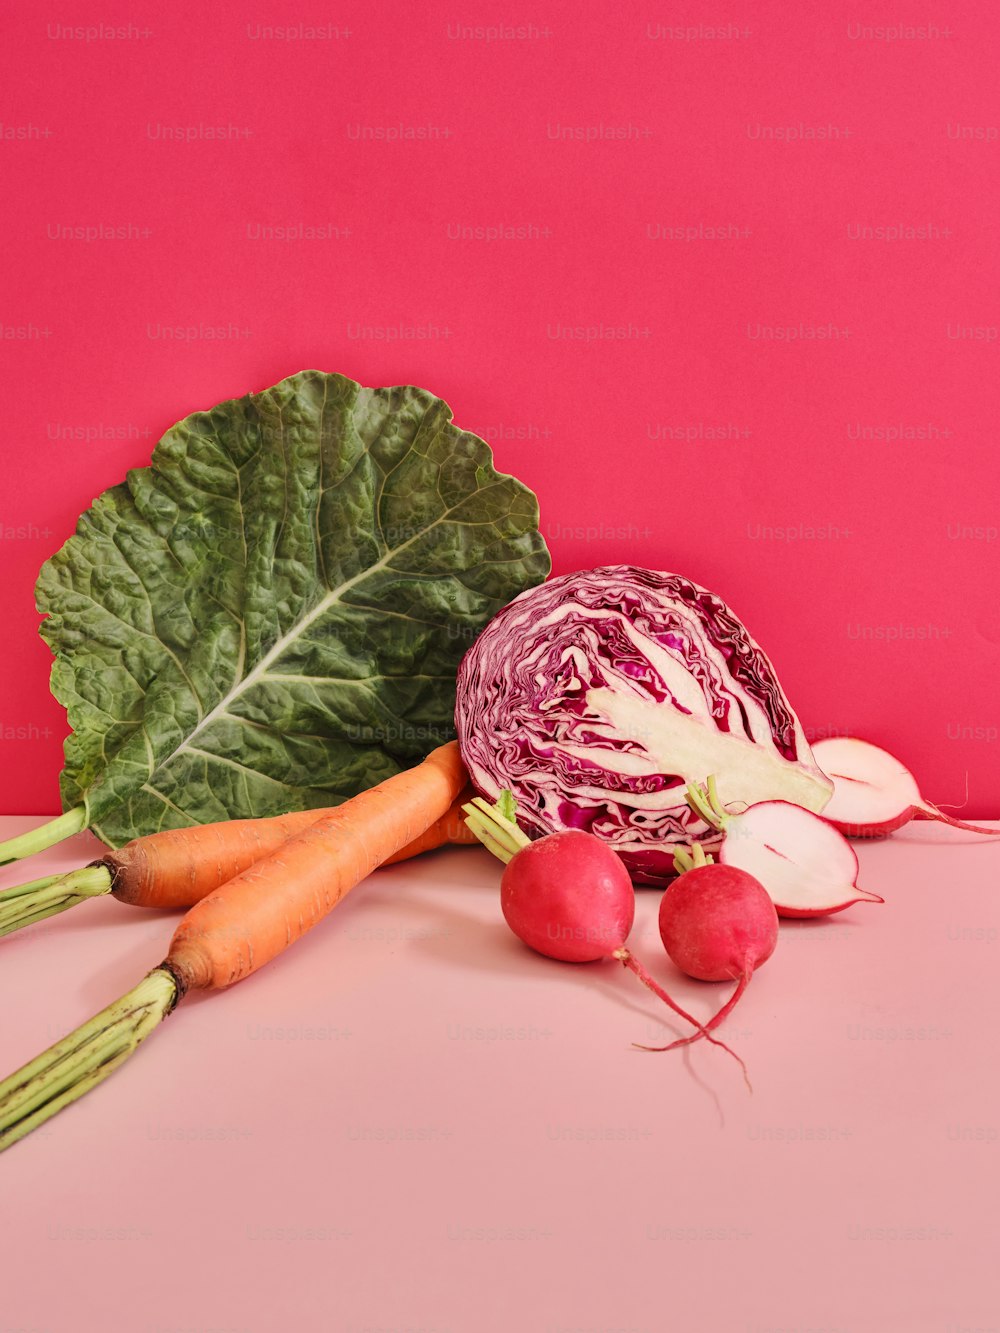 a cabbage, radishes, and carrots on a pink surface